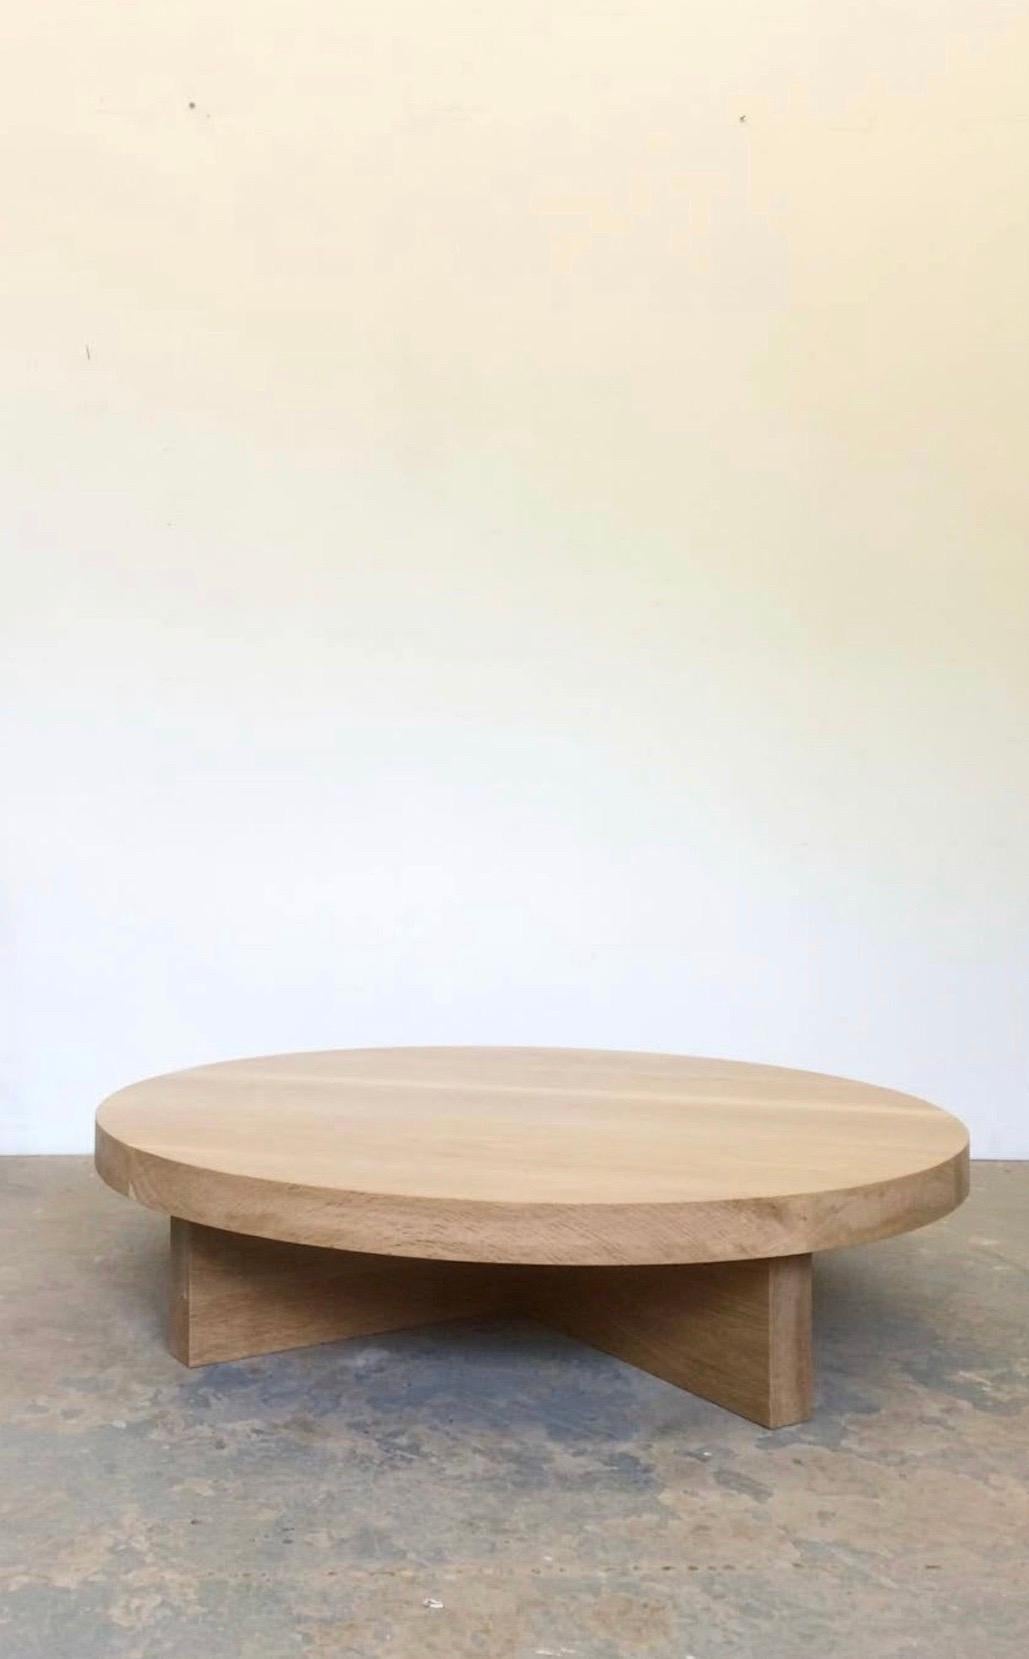 This solid wood coffee table is handcrafted of wood that retains its natural character, bearing the occasional knot, nick or crack where no two tables are exactly the same.